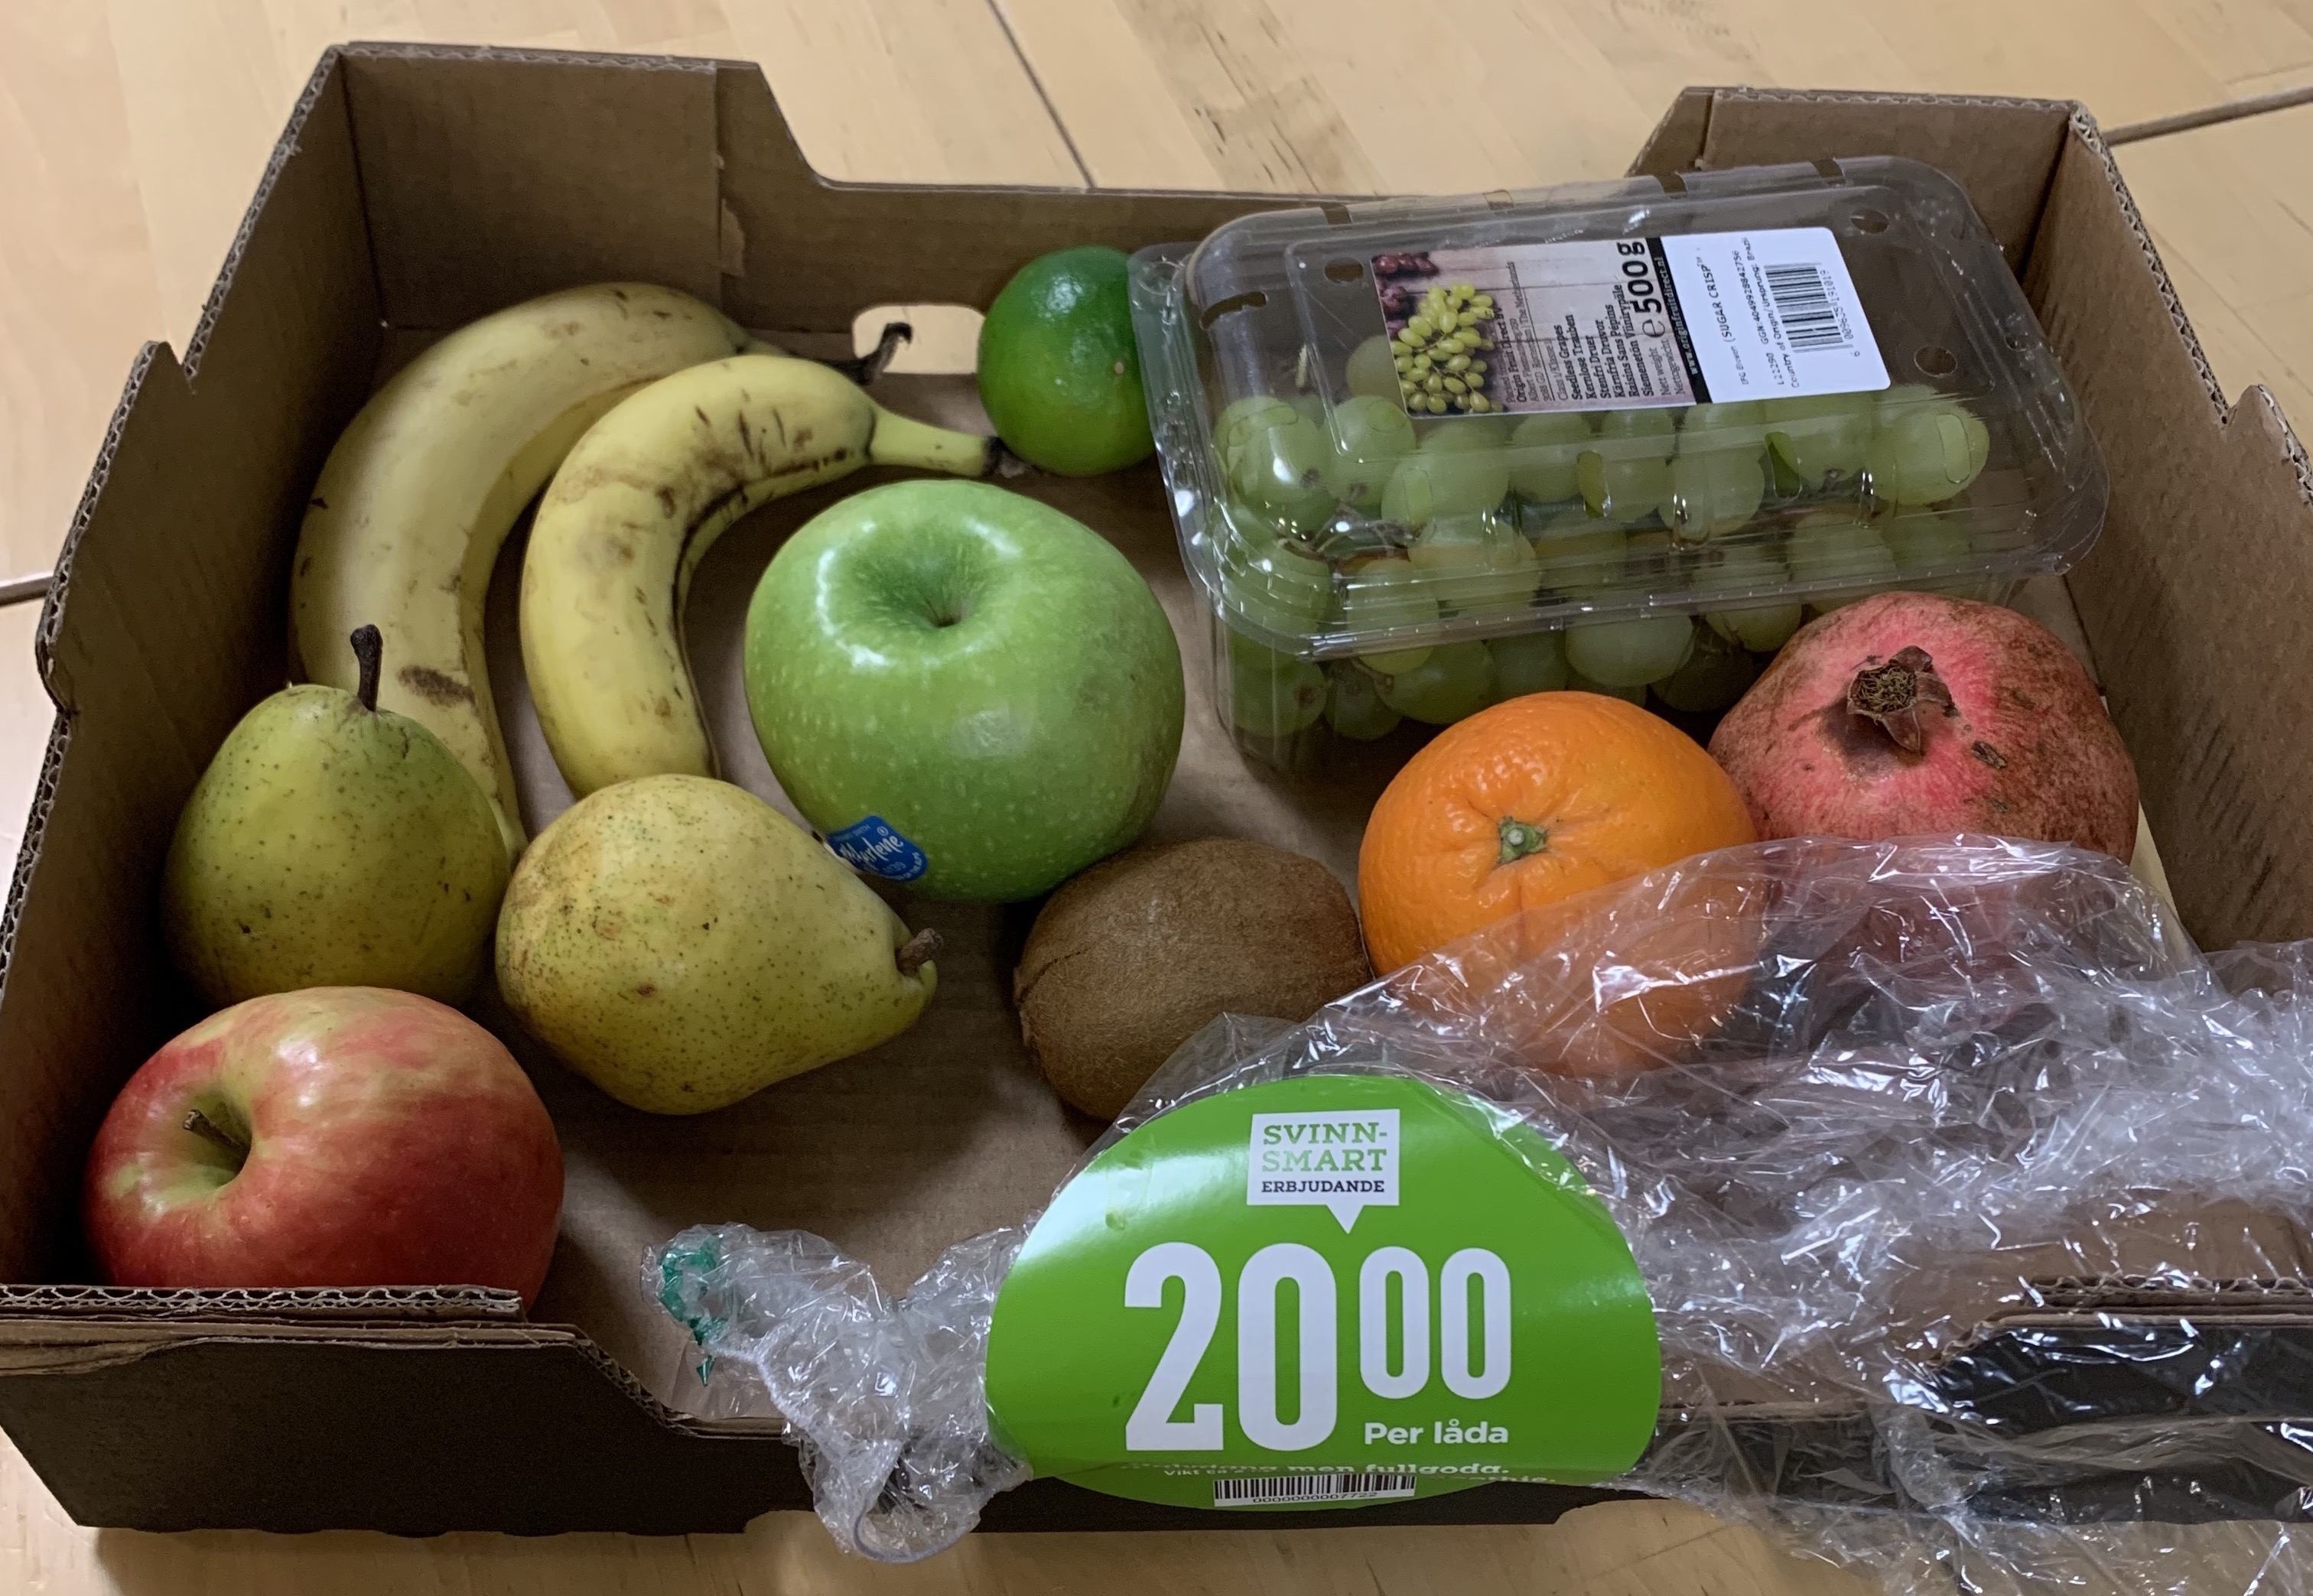 A cardboard box of discounted fruit, including bananas, apples, grapes, pomegranate, pear, and kiwi